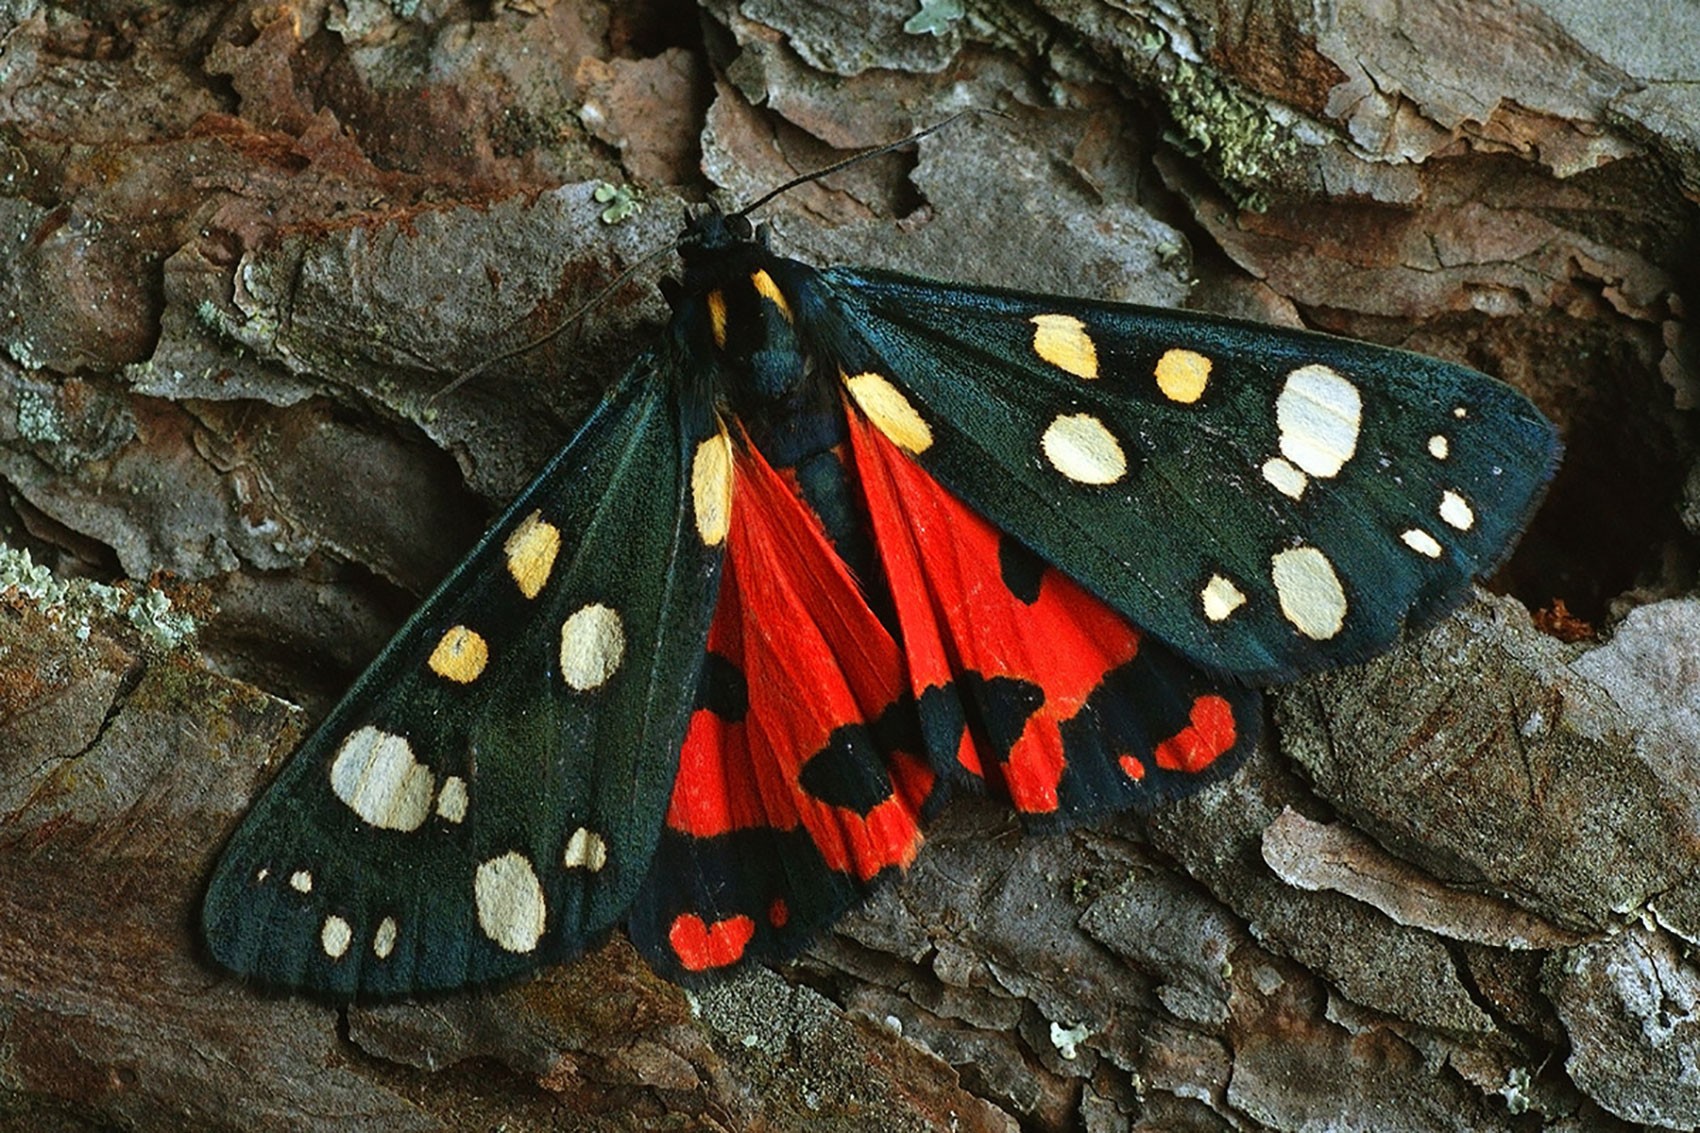 Uk Moths Nine Of The Most Colourful And Distinctive Natural History